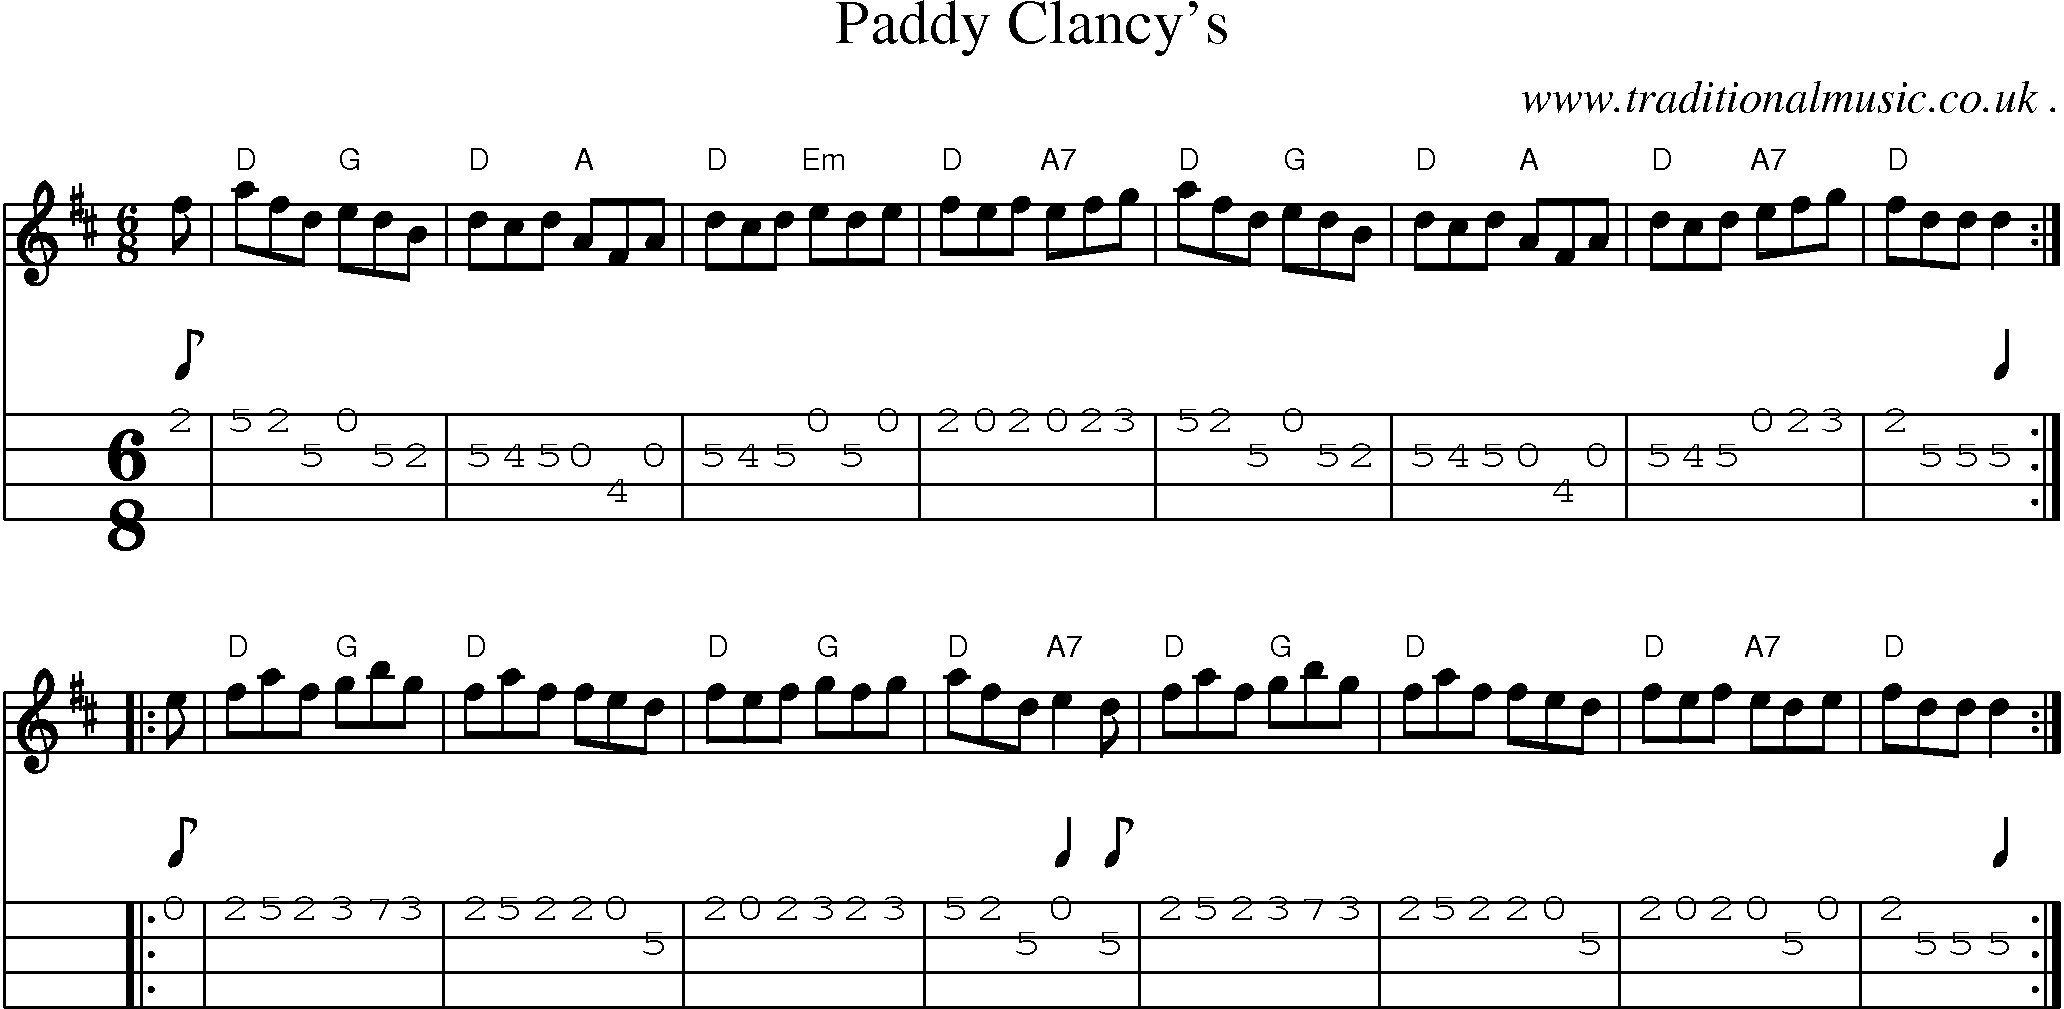 Sheet-music  score, Chords and Mandolin Tabs for Paddy Clancys